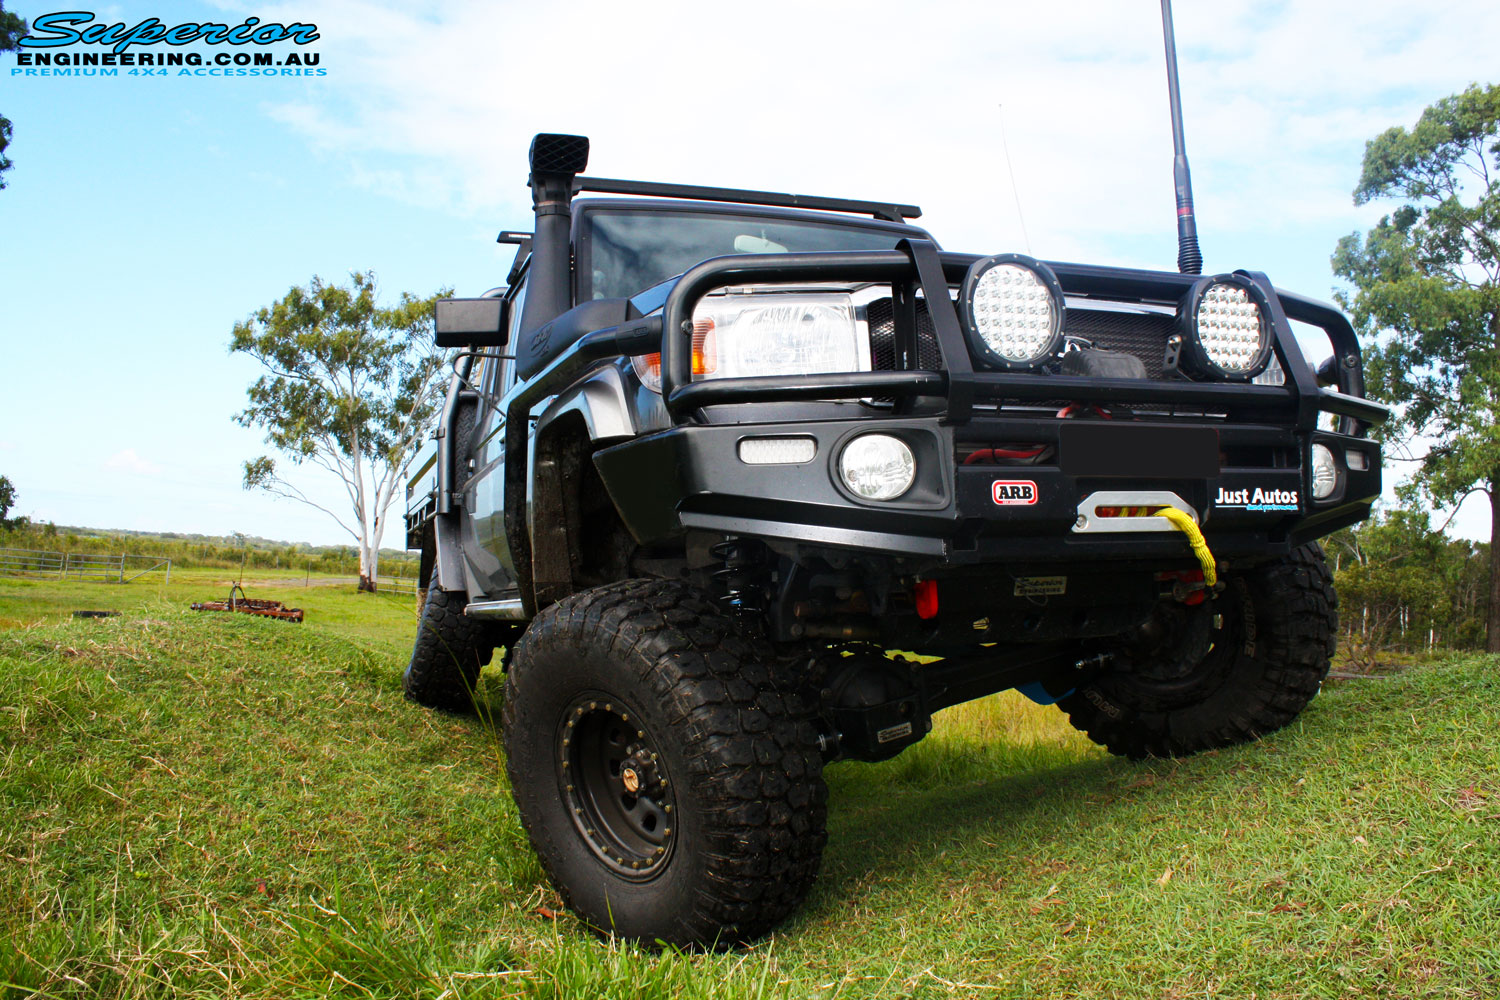 Front on view of a Grey Toyota 79 Series Landcruiser Dual Cab after fitment of a Superior 4" Inch Rear Coil Conversion Kit with Hyperflex Radius Arms.